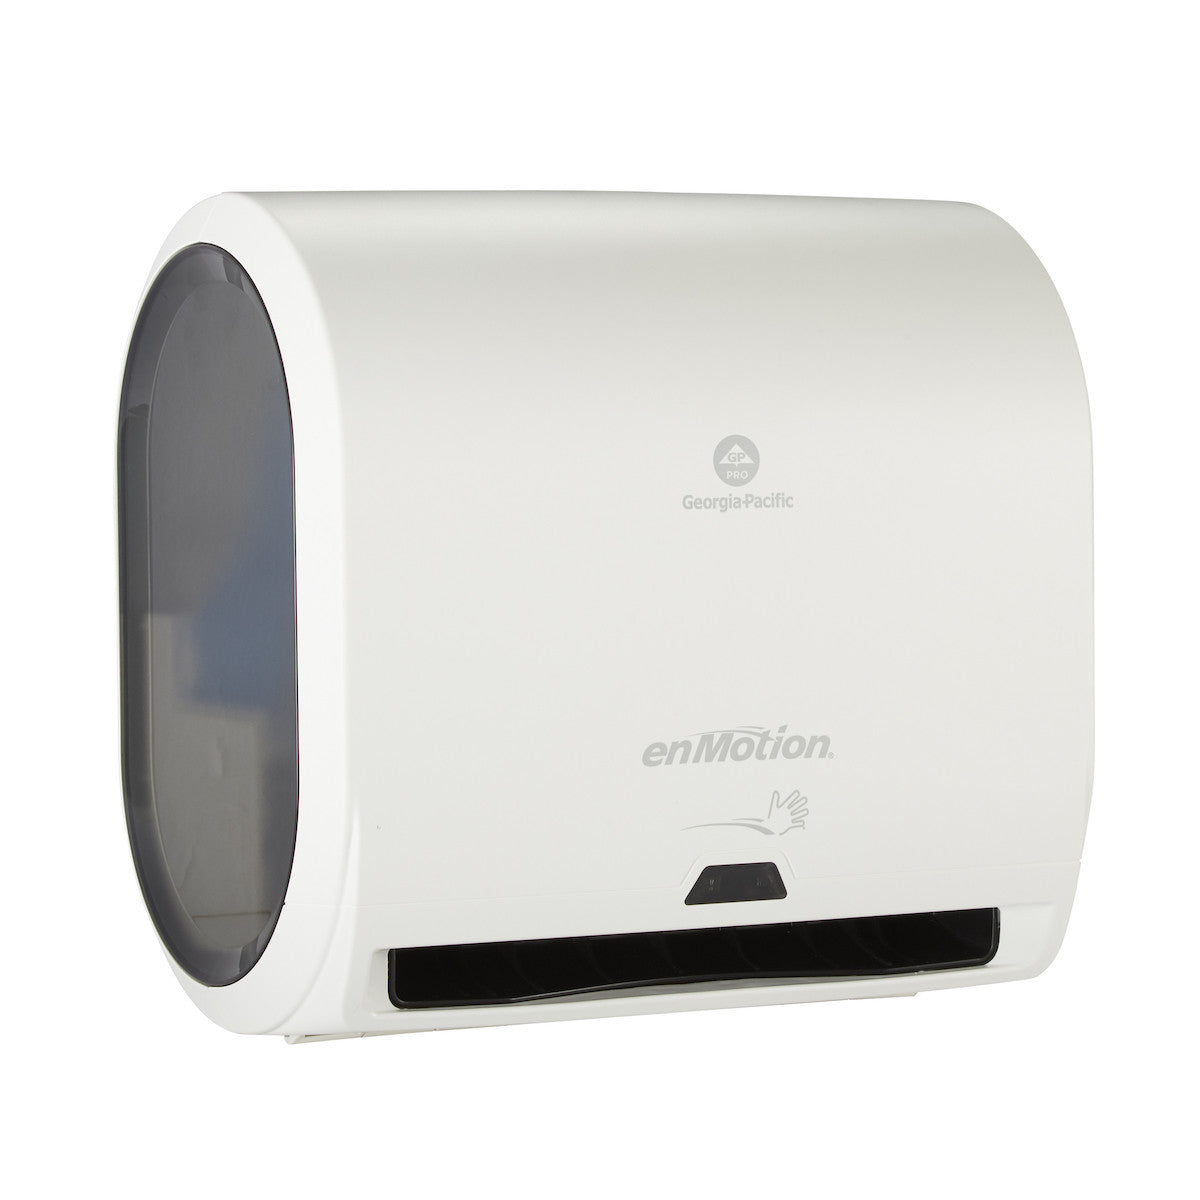 Georgia Pacific 59447A enMotion Impulse 10" 1-Roll Automated Touchless Paper Towel Dispenser, White